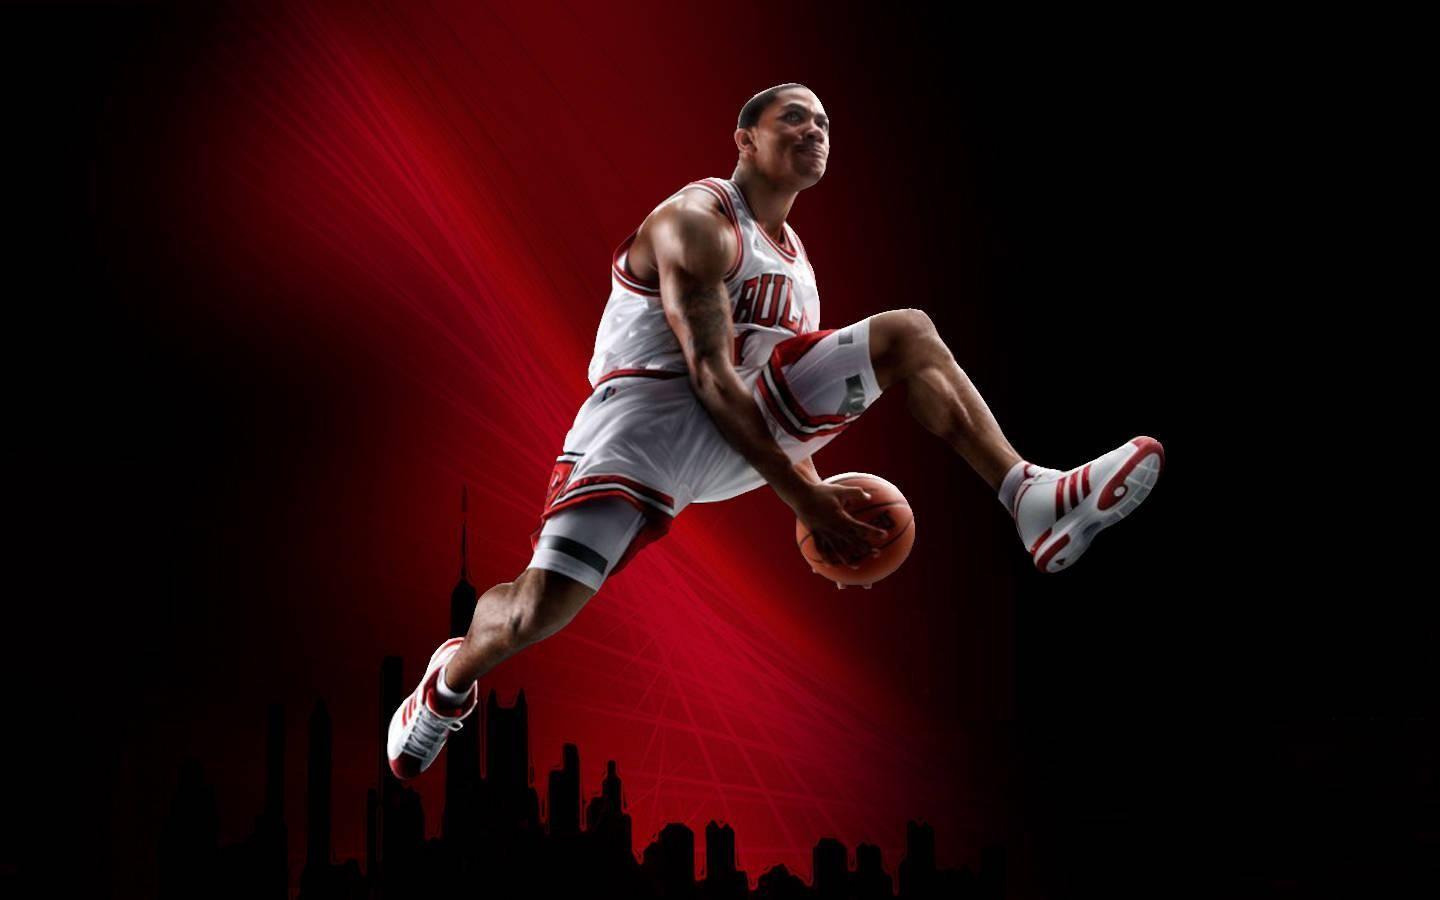 Amazing Basketball wallpapers and background images for all your devices. Download for free 65+ Amazing Basketball wallpapers.